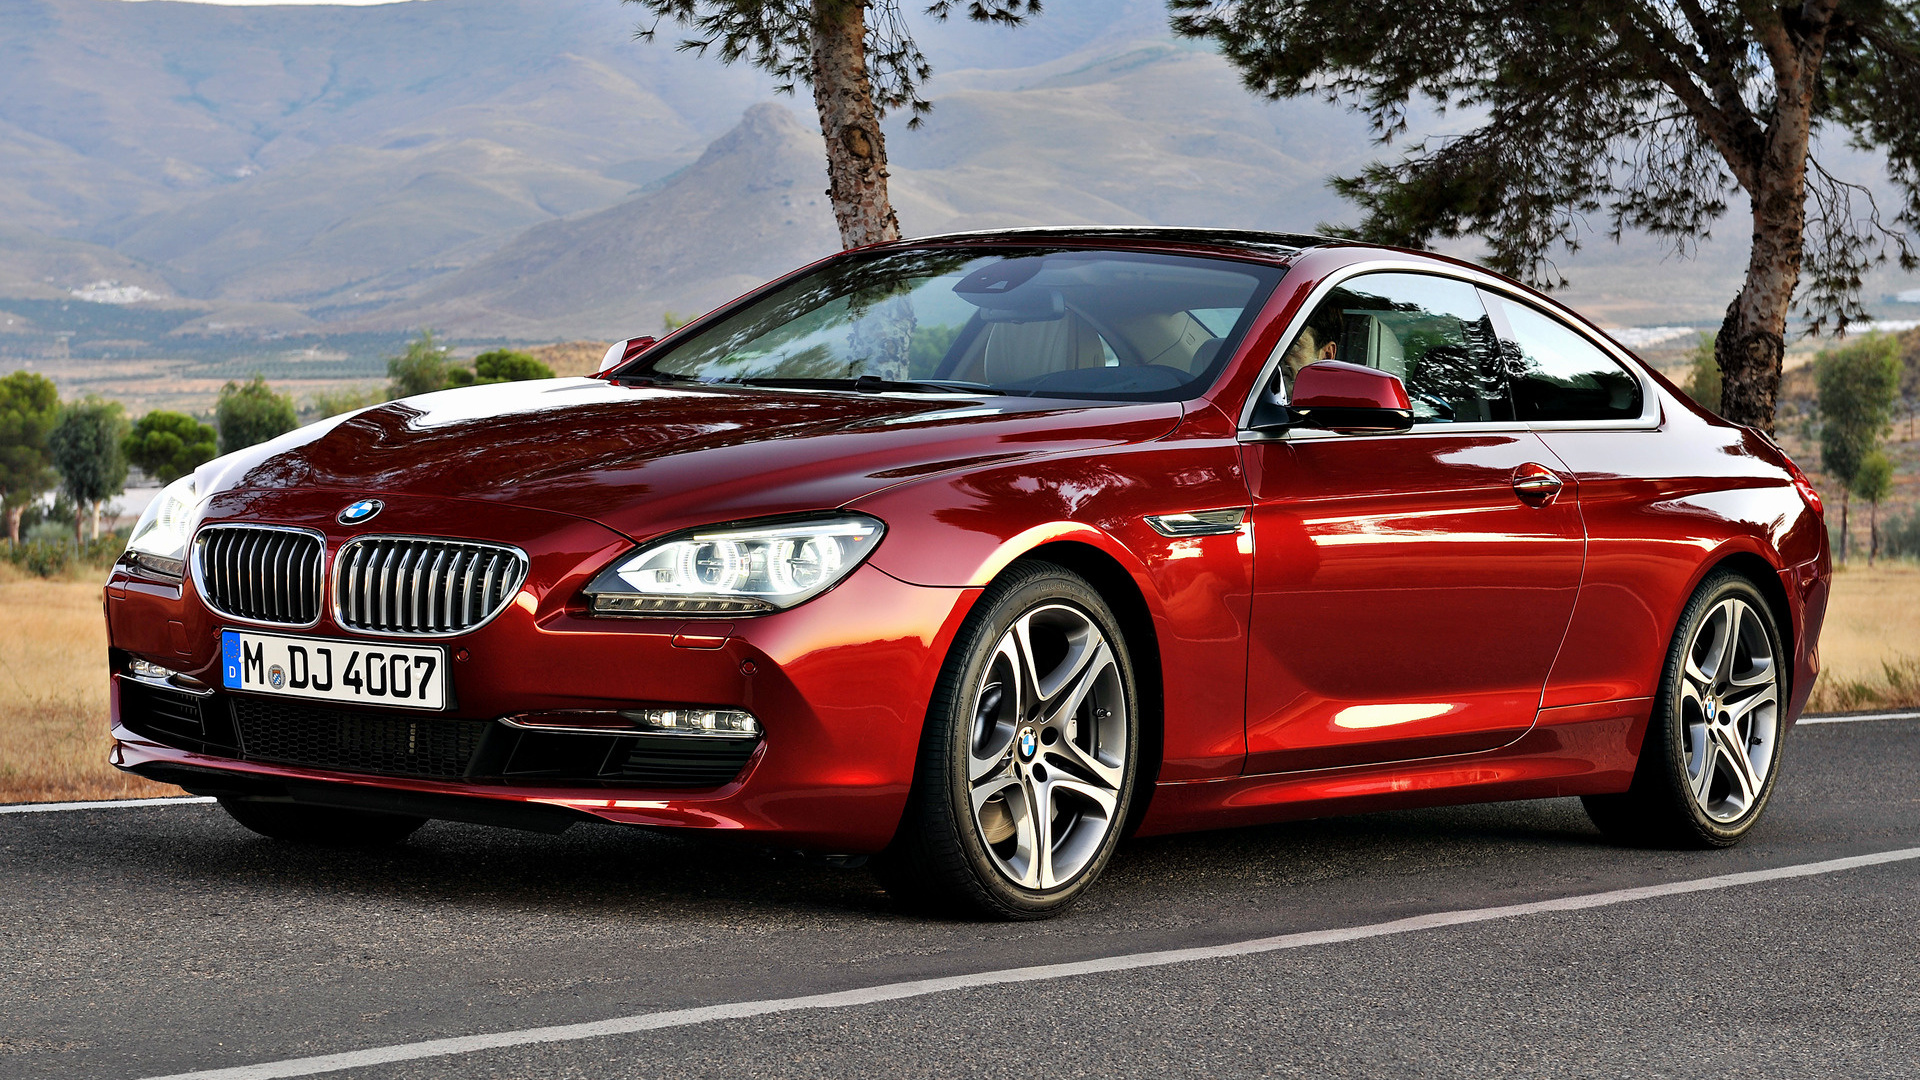 2011 BMW 6 Series Coupe - Wallpapers and HD Images | Car Pixel